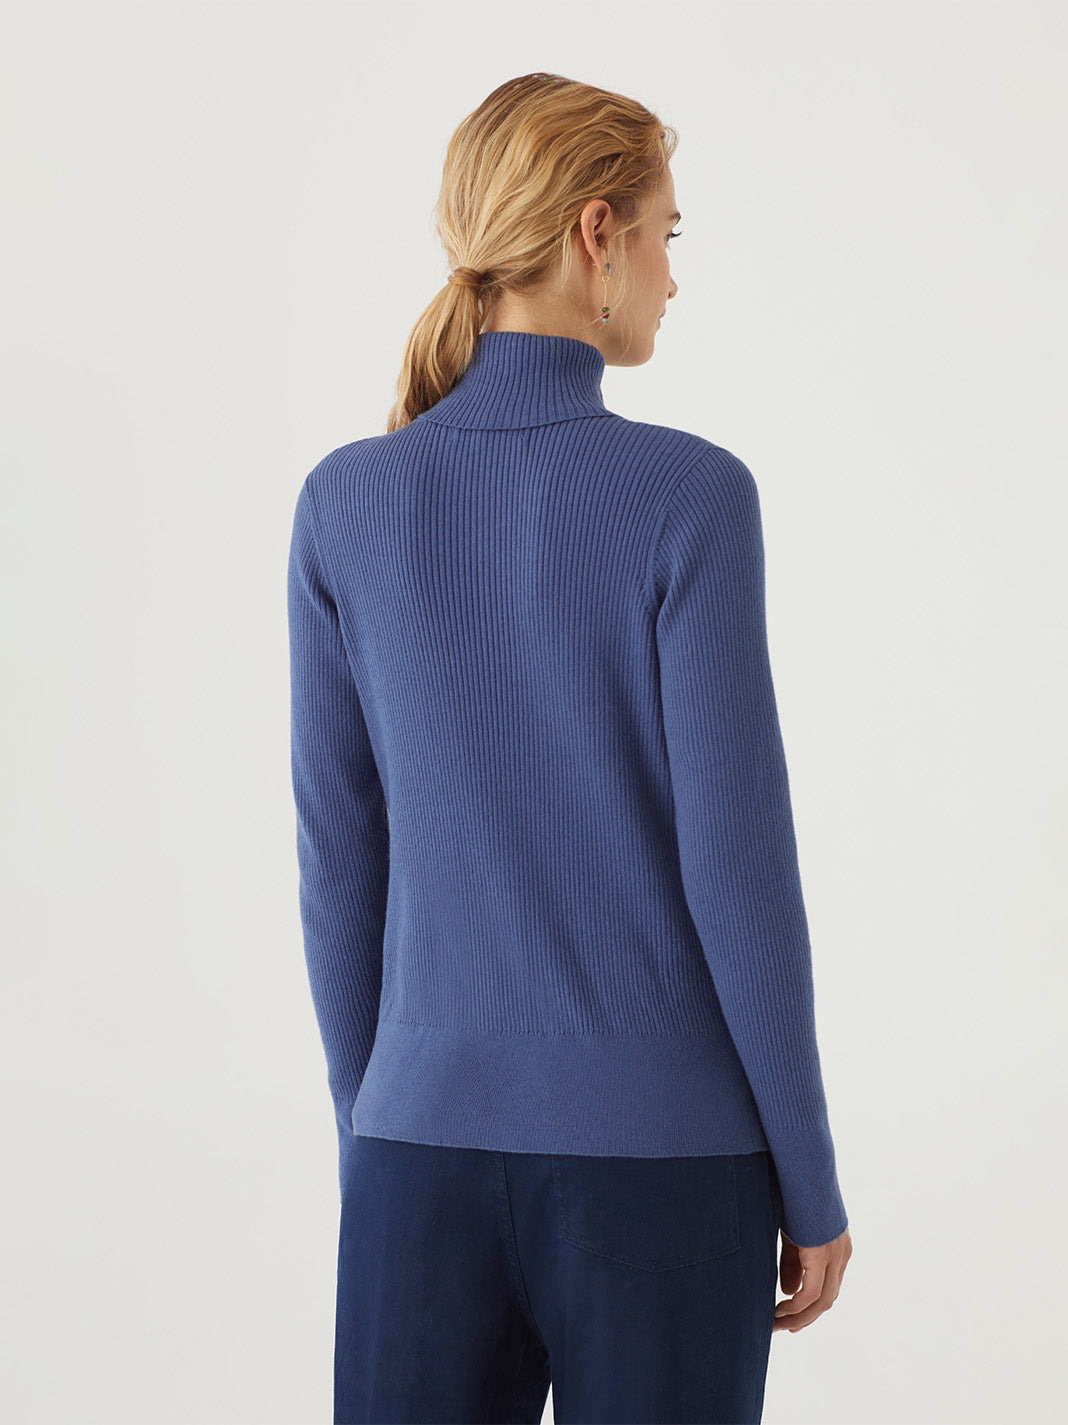 Turtle Neck Rib Sweater in Navy or Mid Blue